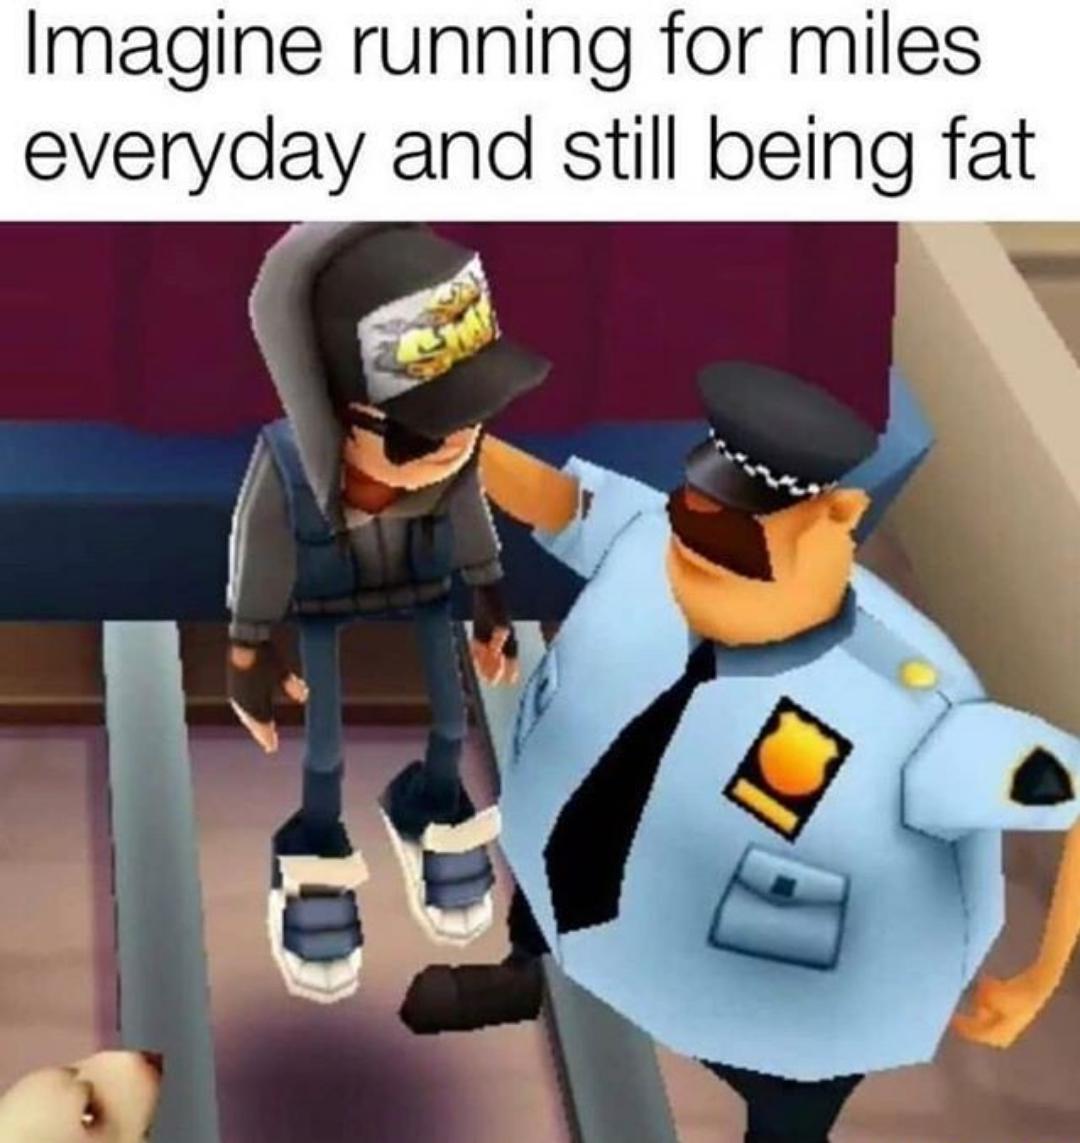 gaming memes - imagine running for miles and still being fat - Imagine running for miles everyday and still being fat